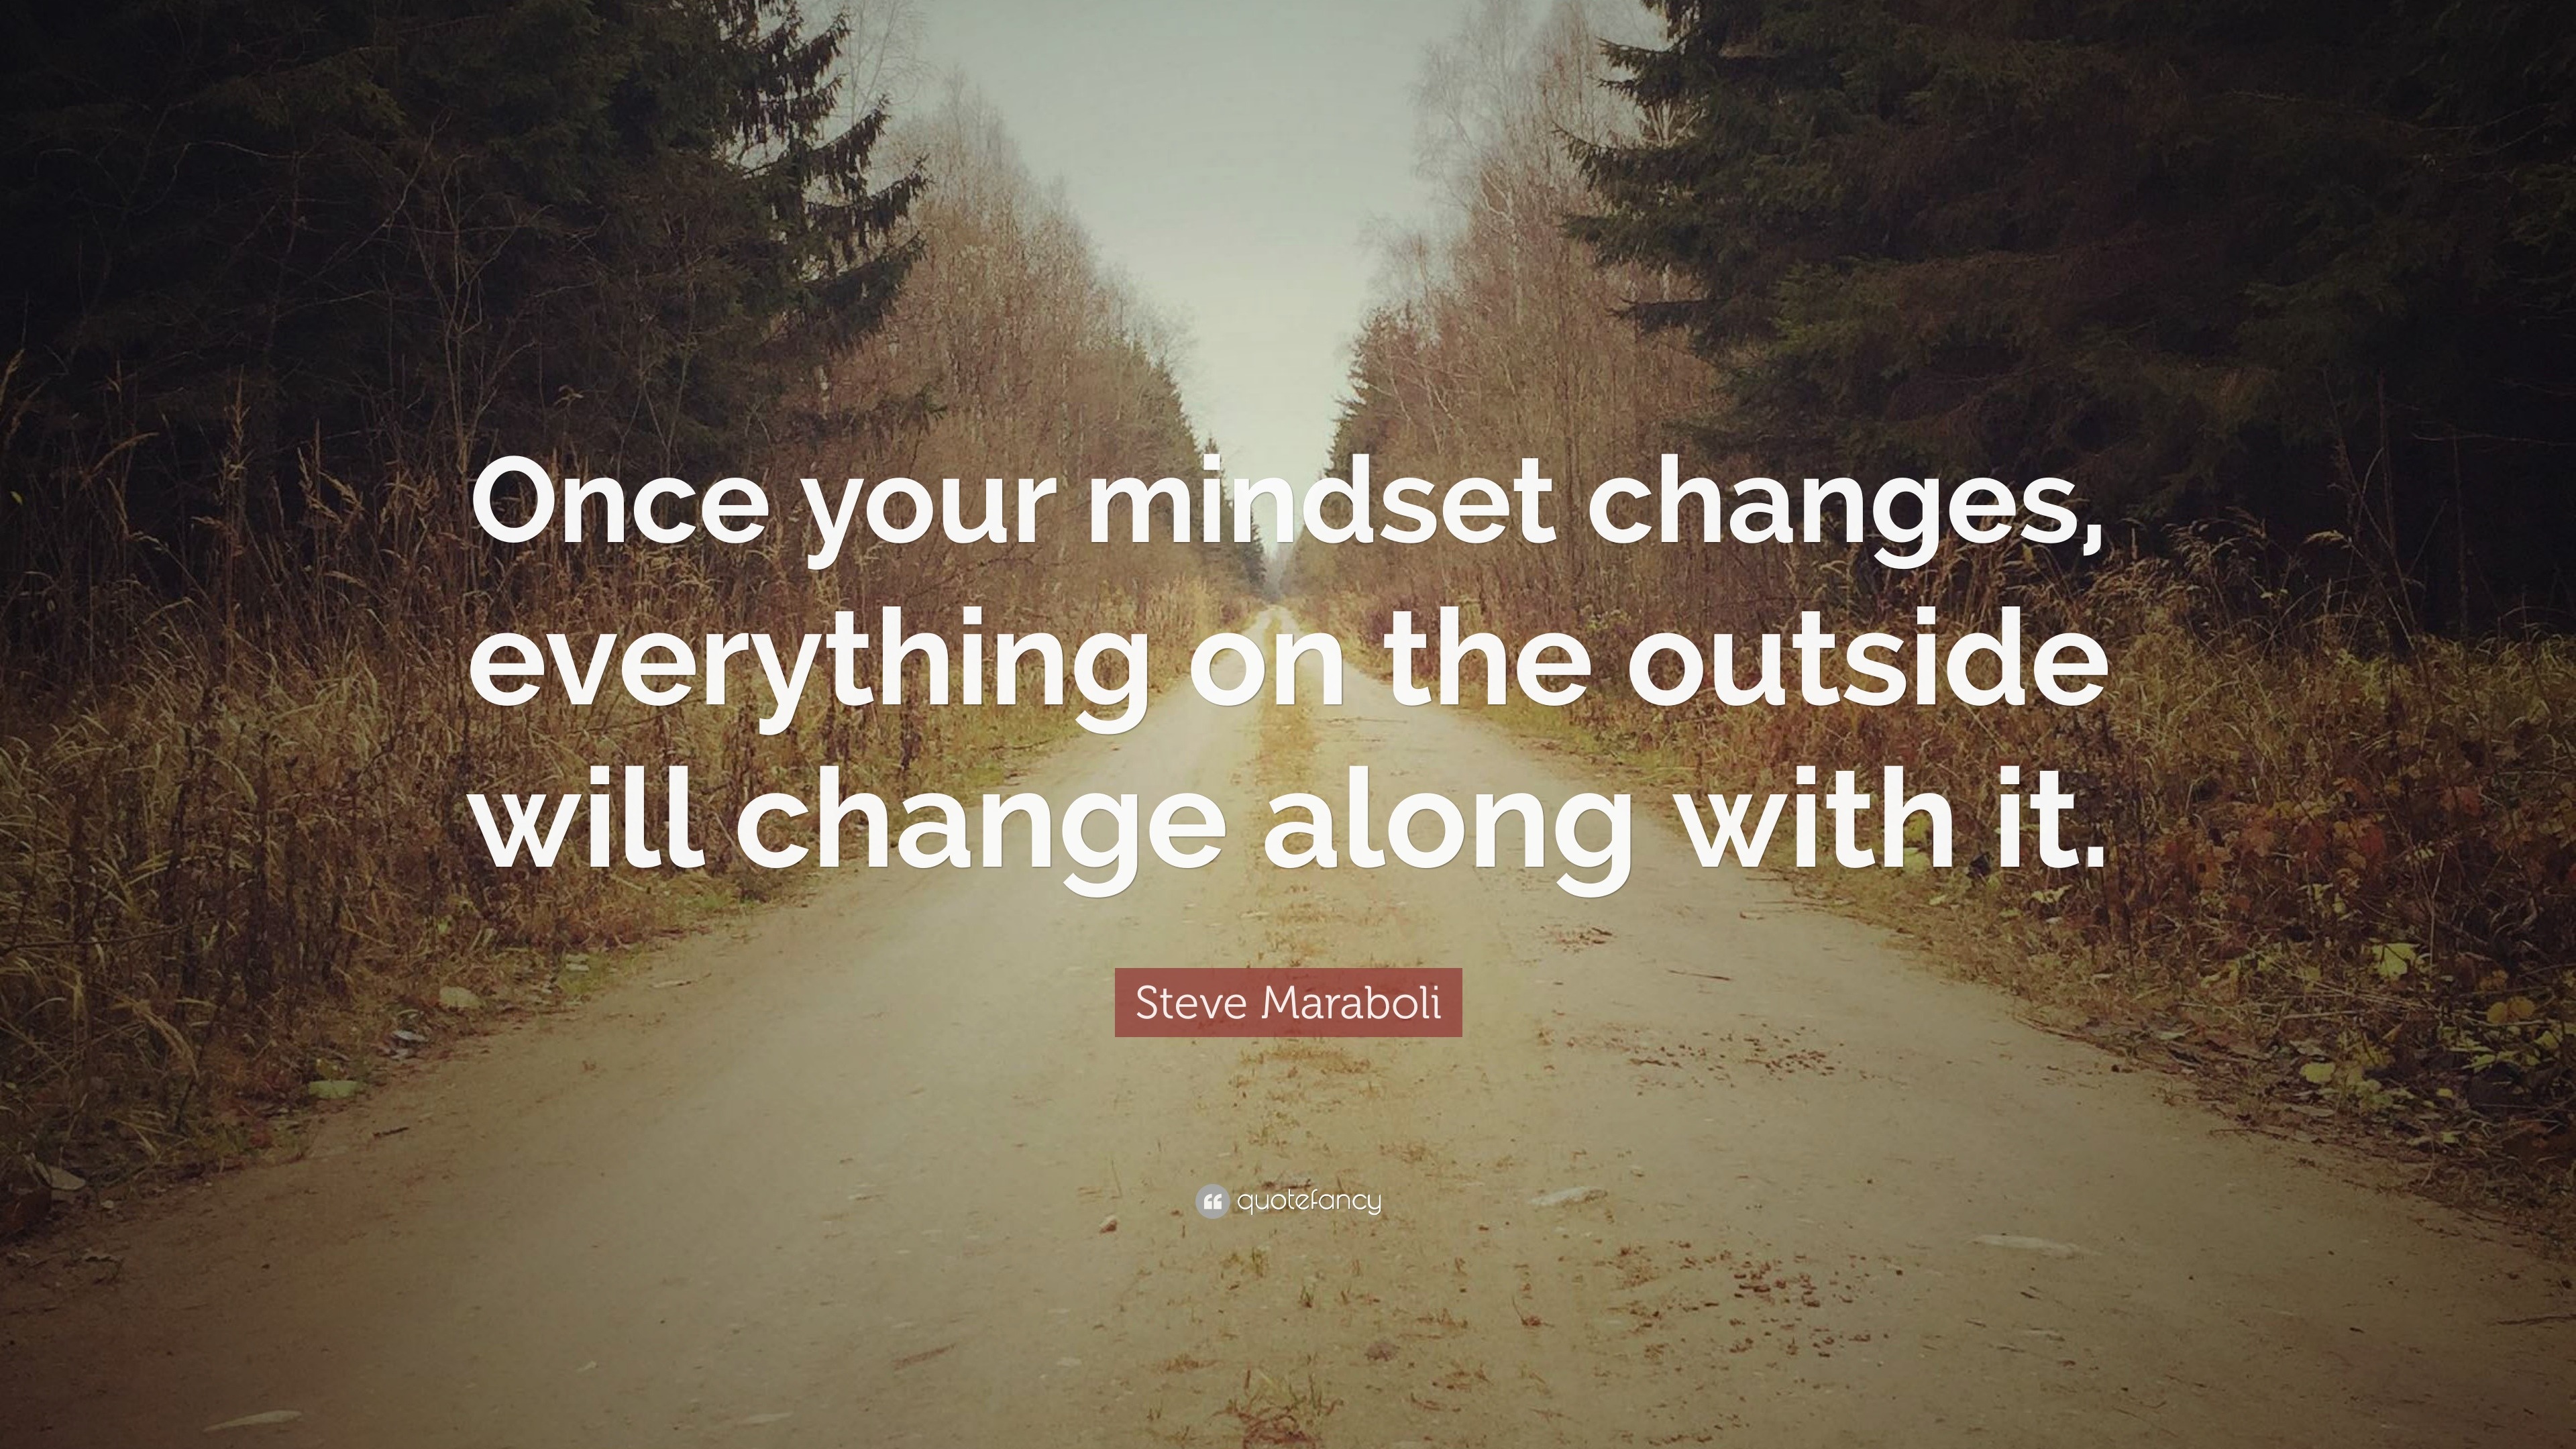 Steve Maraboli Quote: “Once your mindset changes, everything on the ...